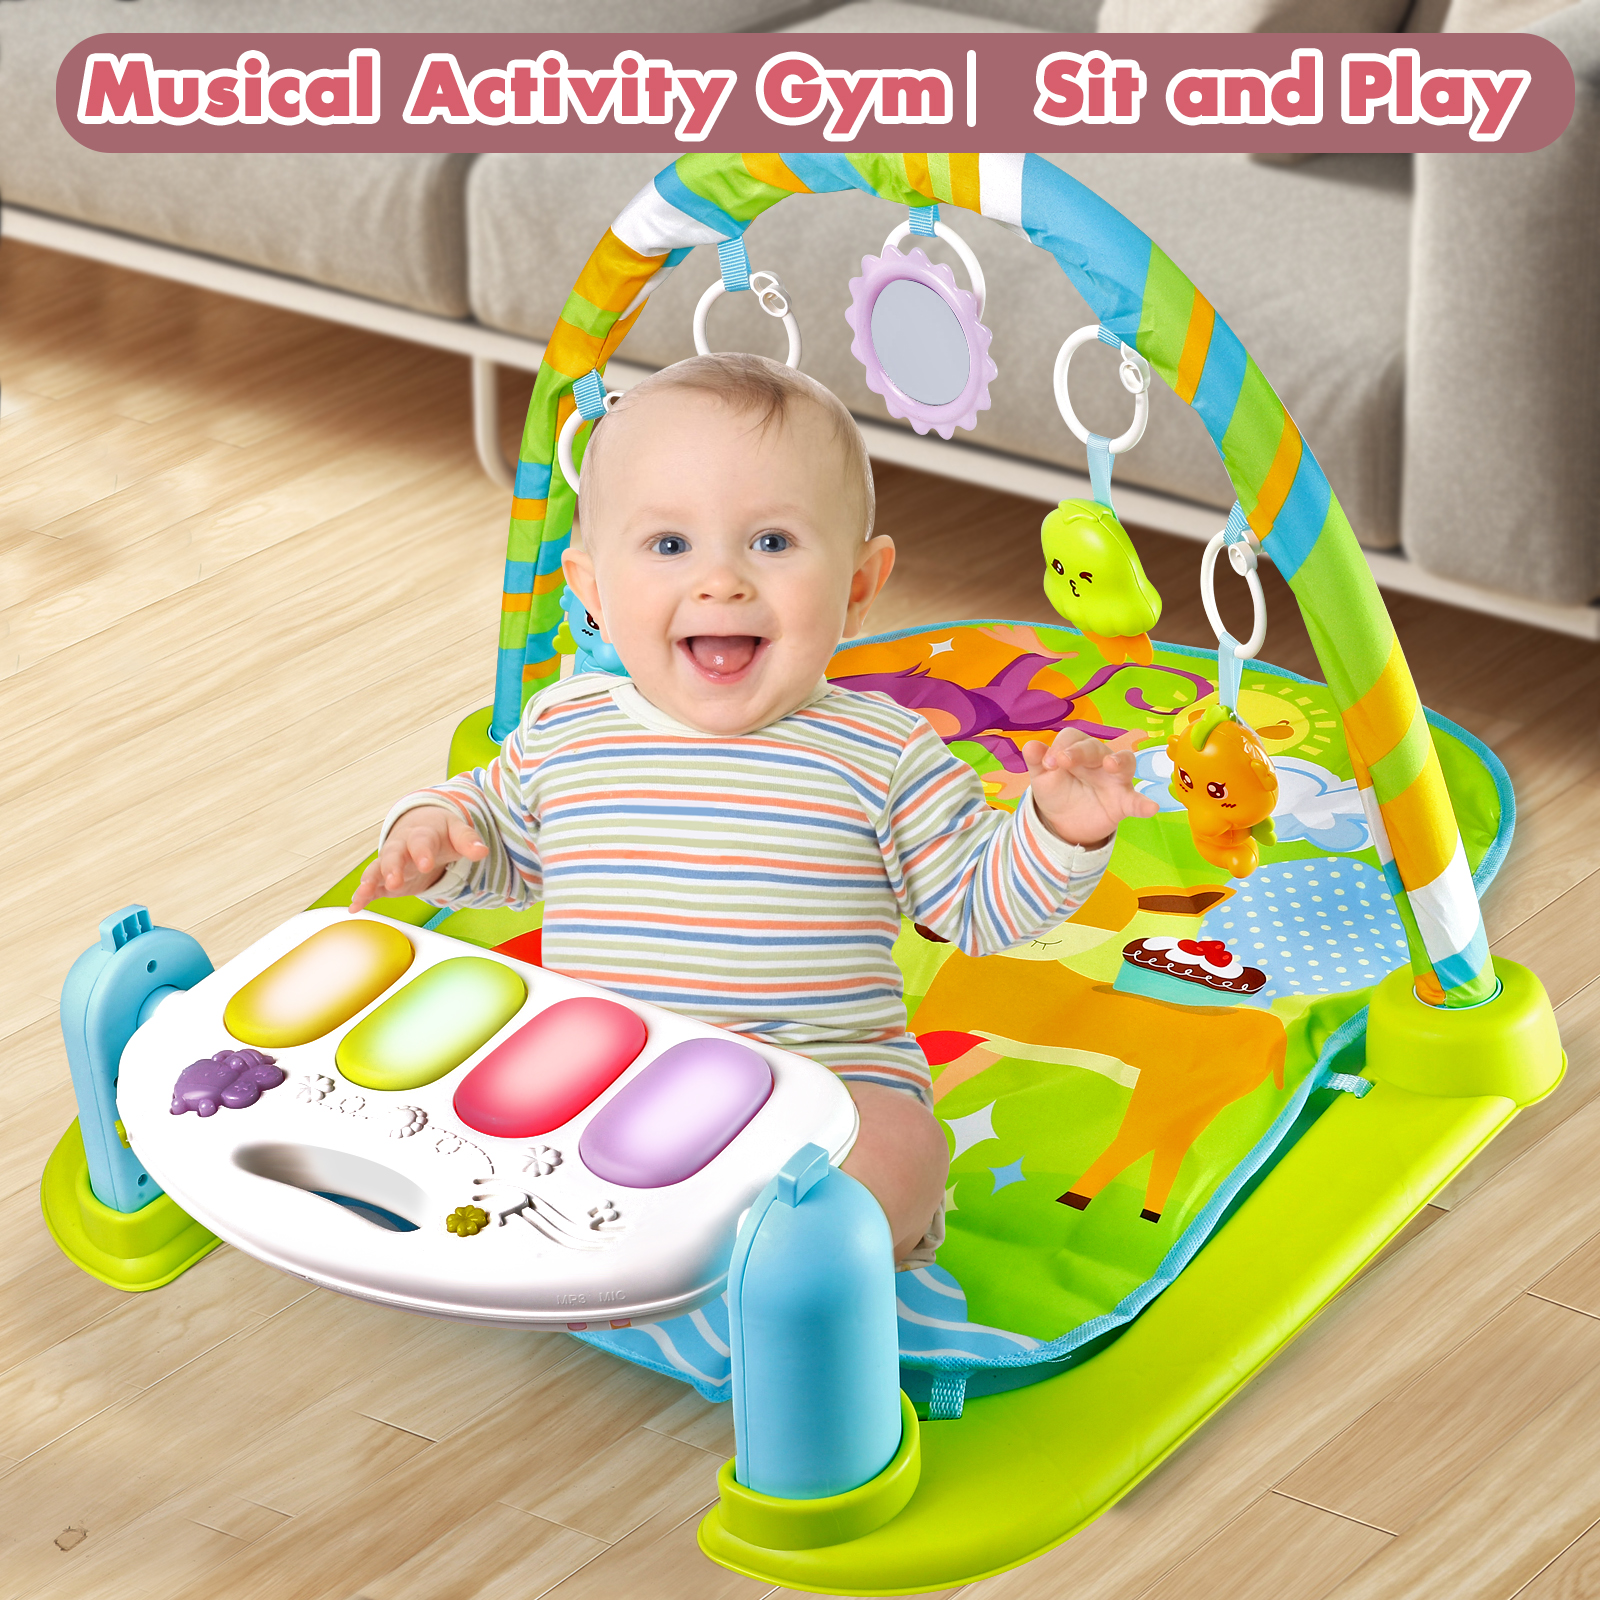 Baby Play Mat Baby Gym Funny Play Piano Tummy Time Baby Activity Gym Mat with 5 Infant Learning Sensory Baby Toys, Music and Lights Boy & Girl Gifts for Newborn Baby 0 to 3 6 9 12 Months - image 4 of 7